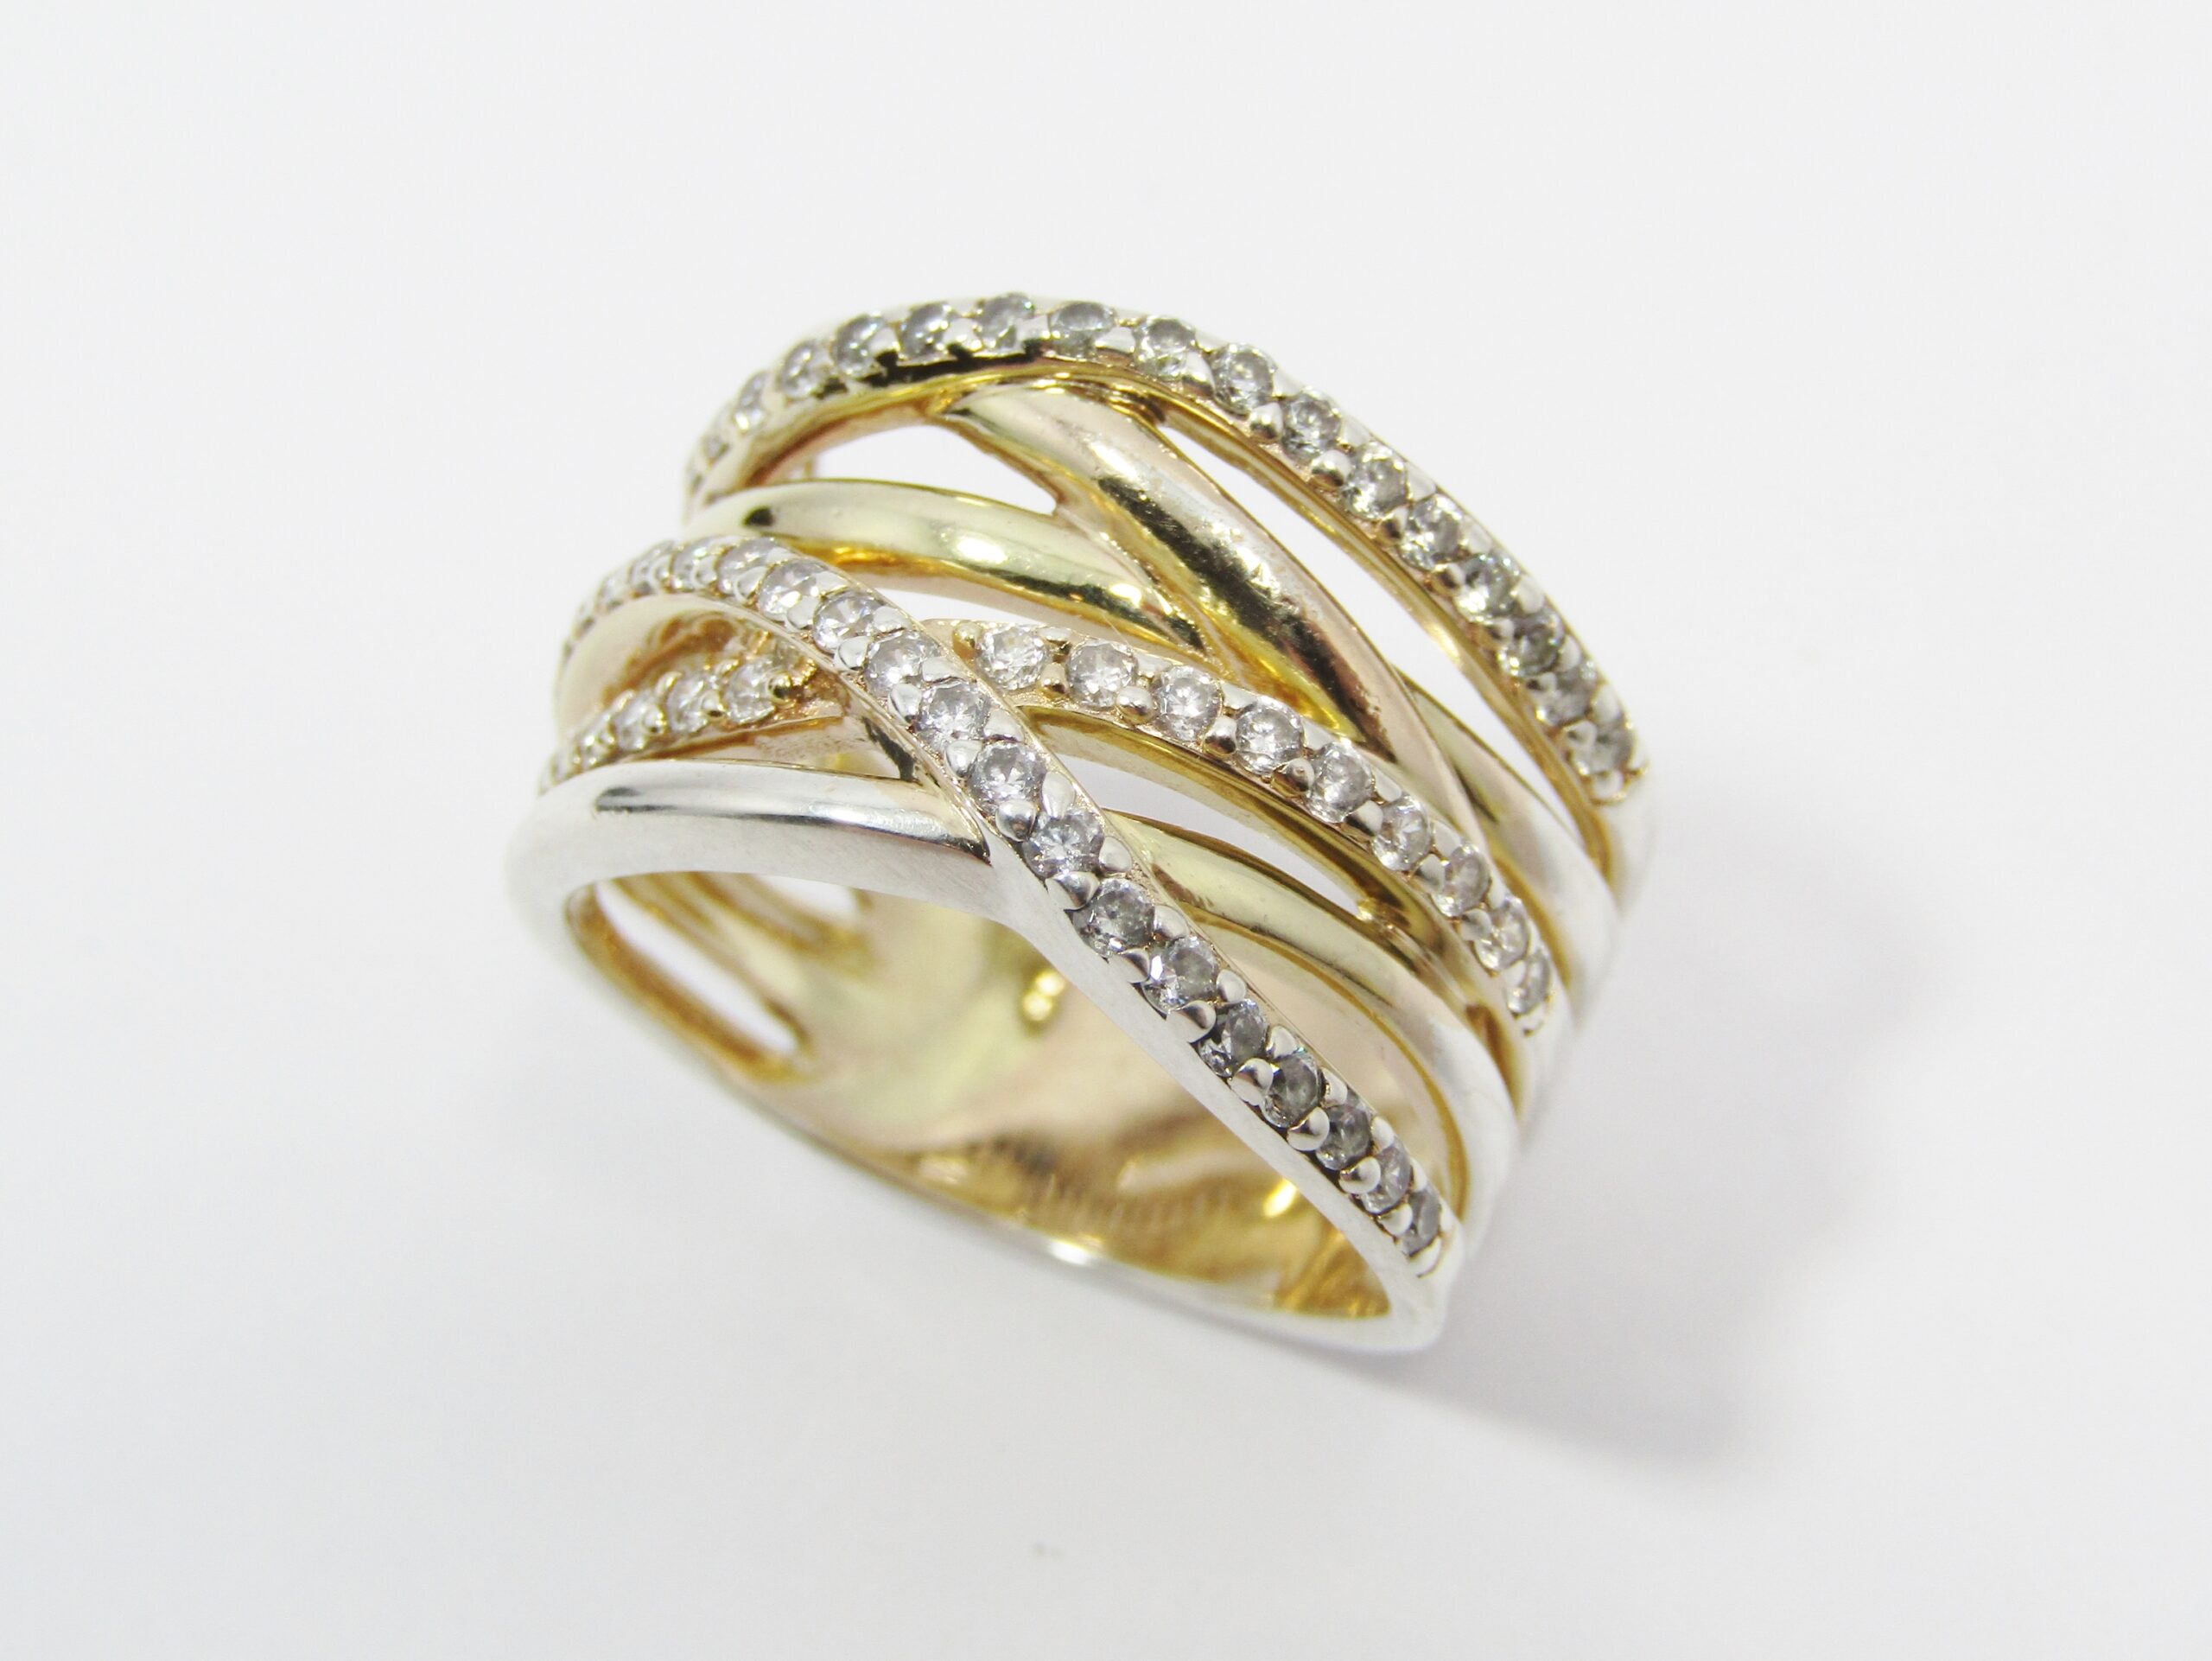 A Stunning Rolled Gold On Sterling Silver Cross Over Design Ring With Tiny Zirconia’s